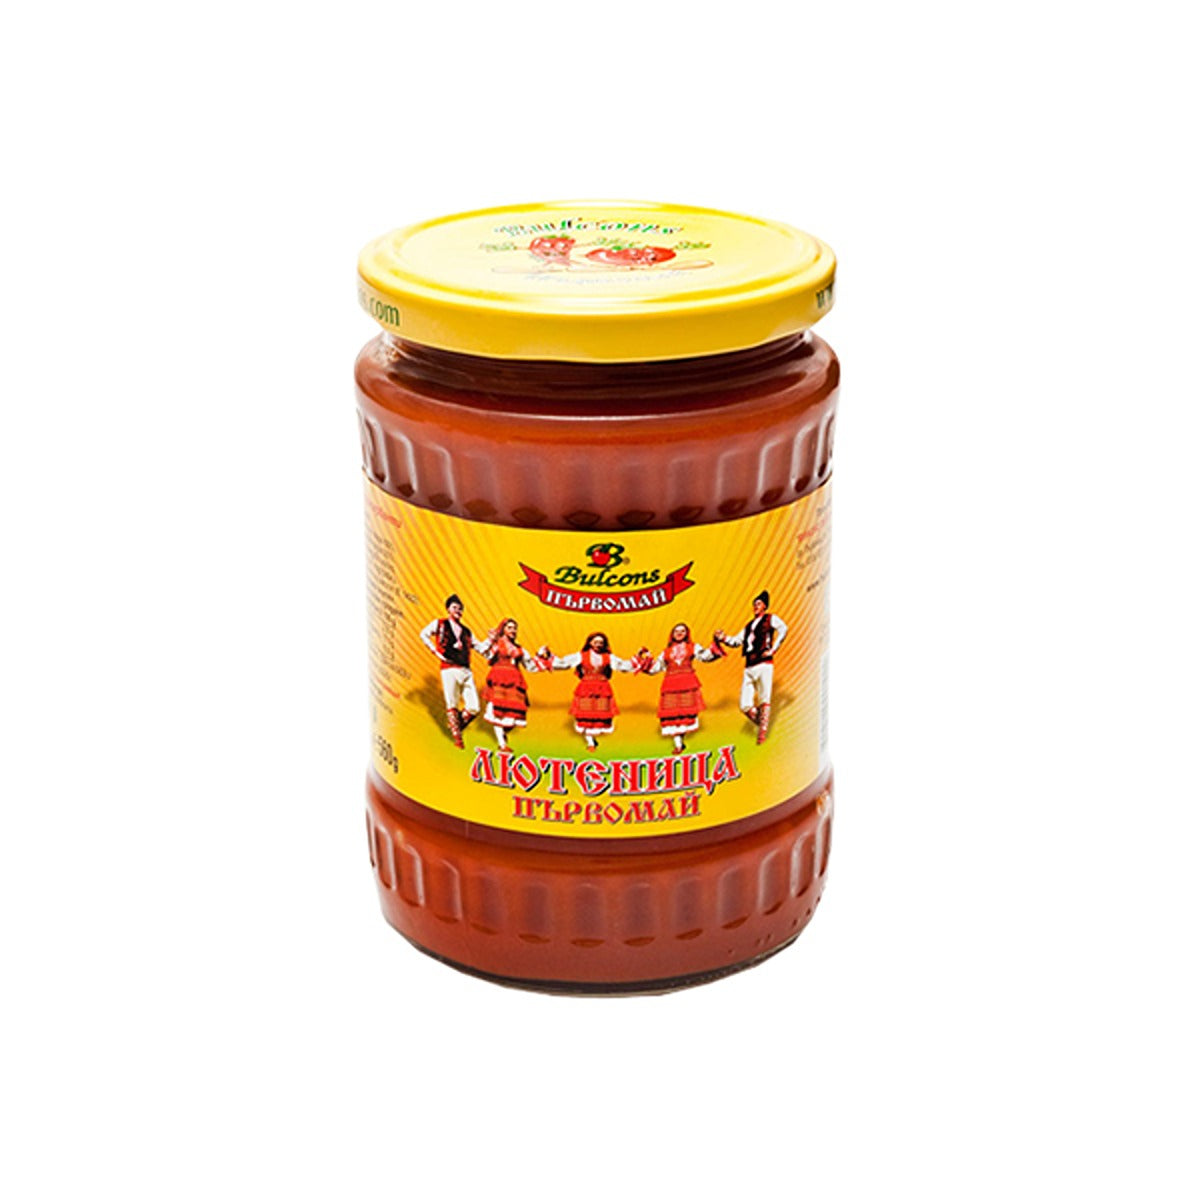 Bulcons - Pepper & Eggplant Sauce - 525g - Continental Food Store